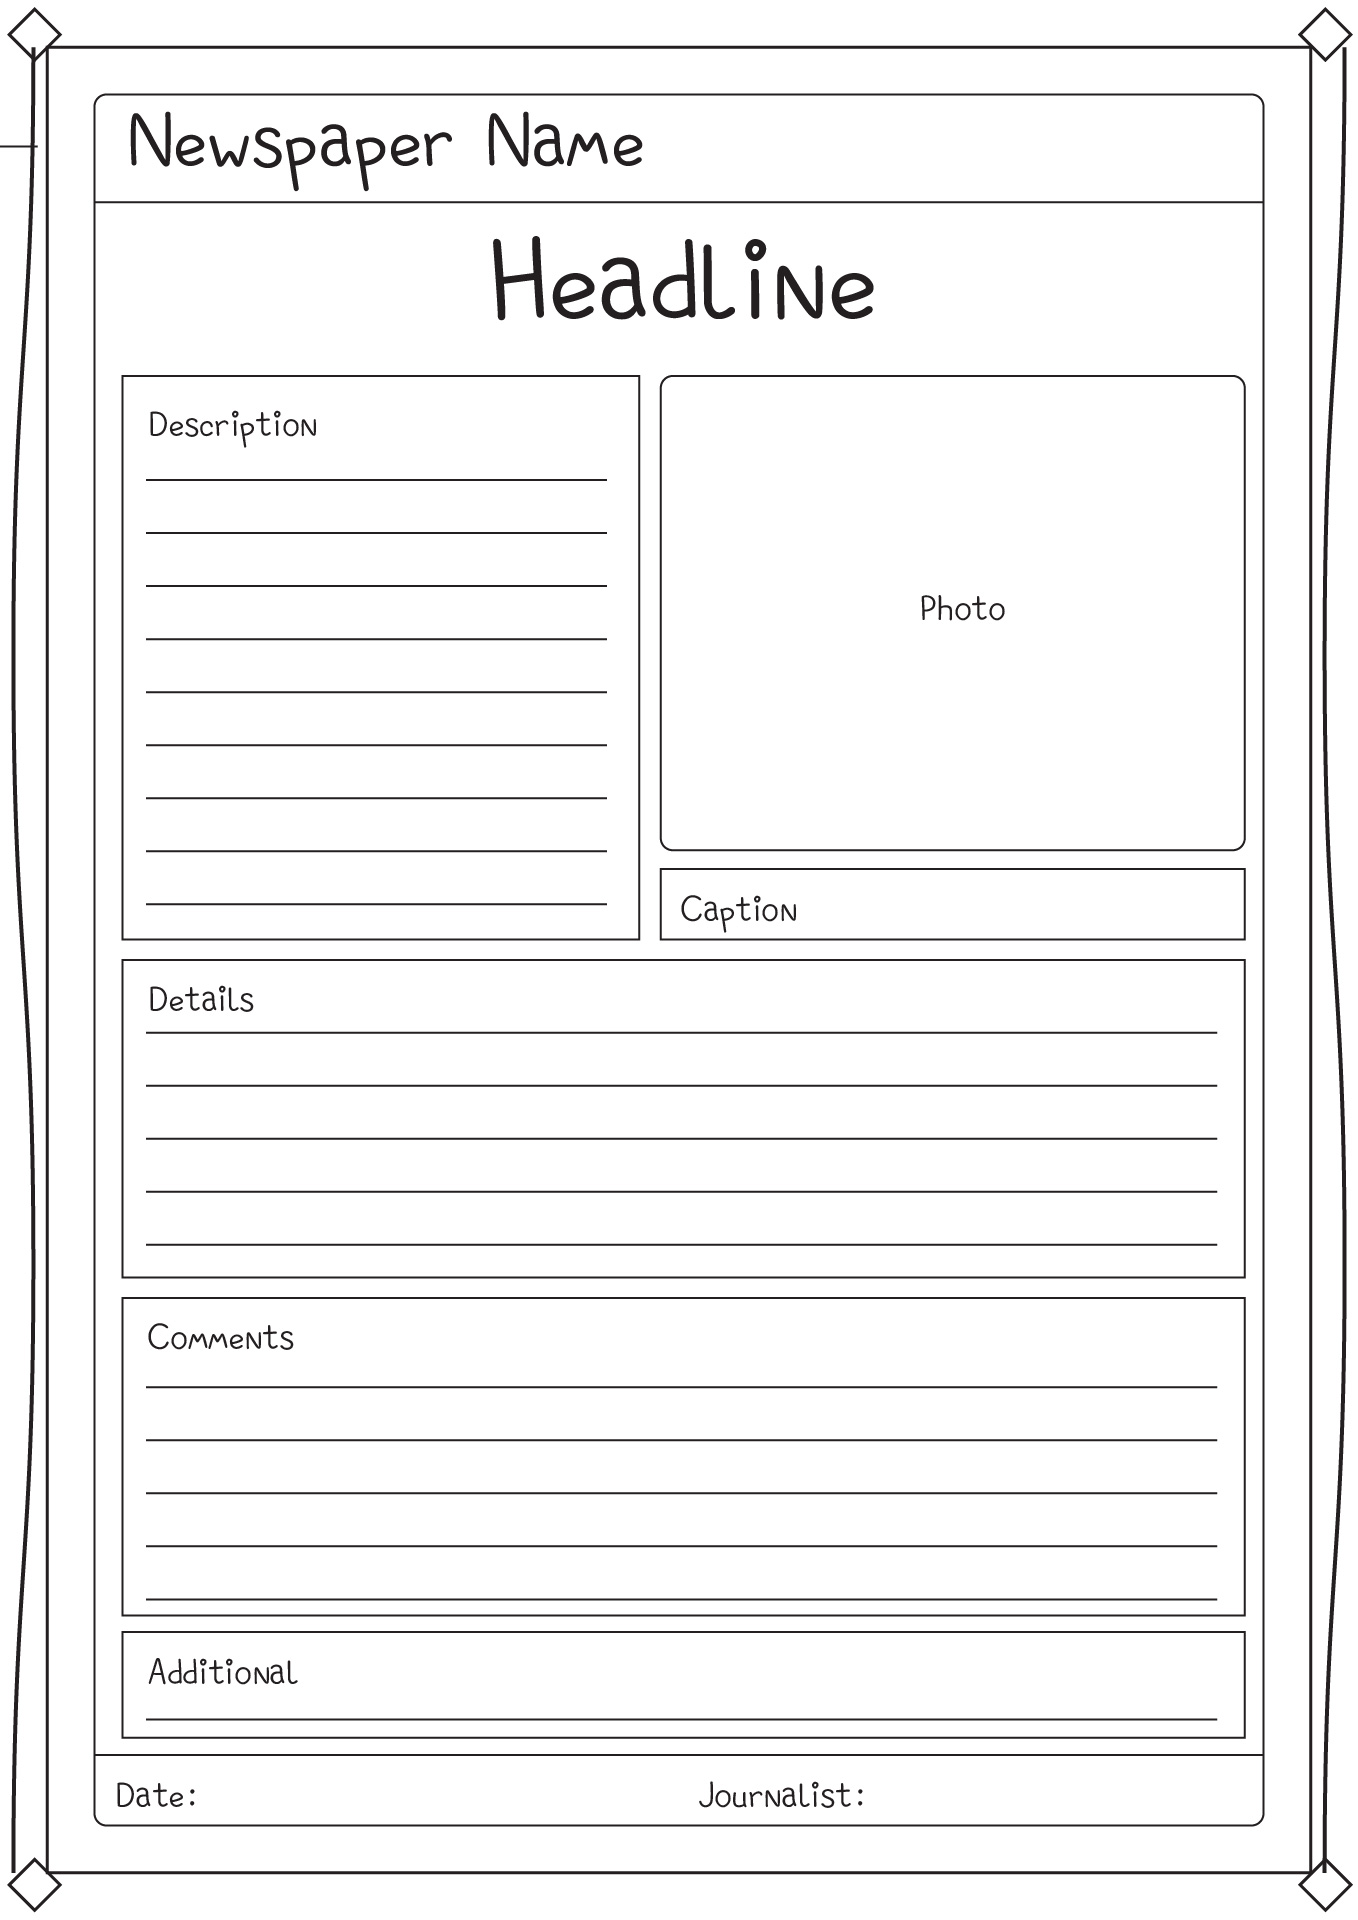 Writing Newspaper Article Template